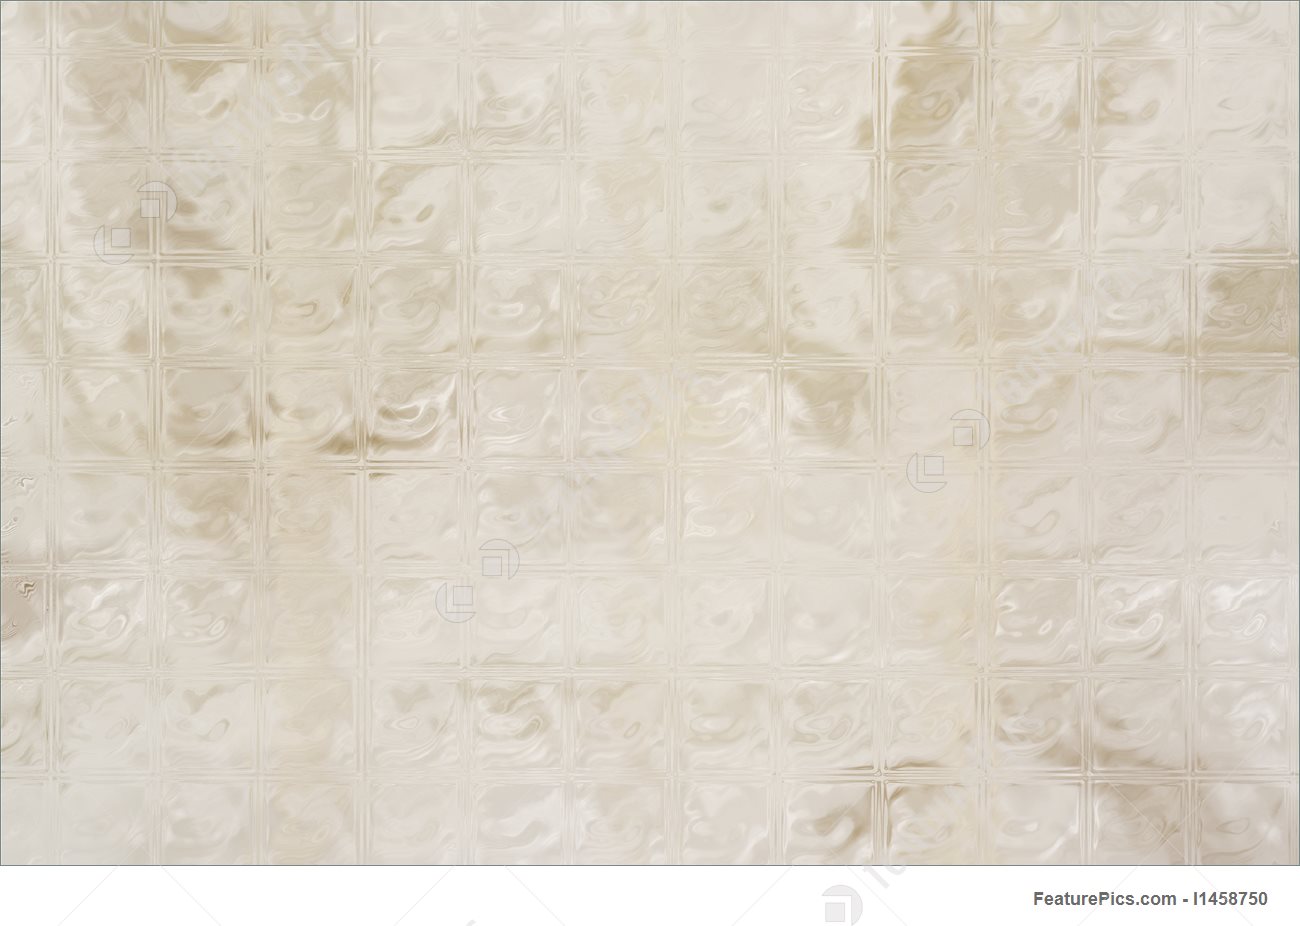 Glass Tile Background Image In Cream Or Ivory Color - Abstract Cream Color Background Cream - HD Wallpaper 